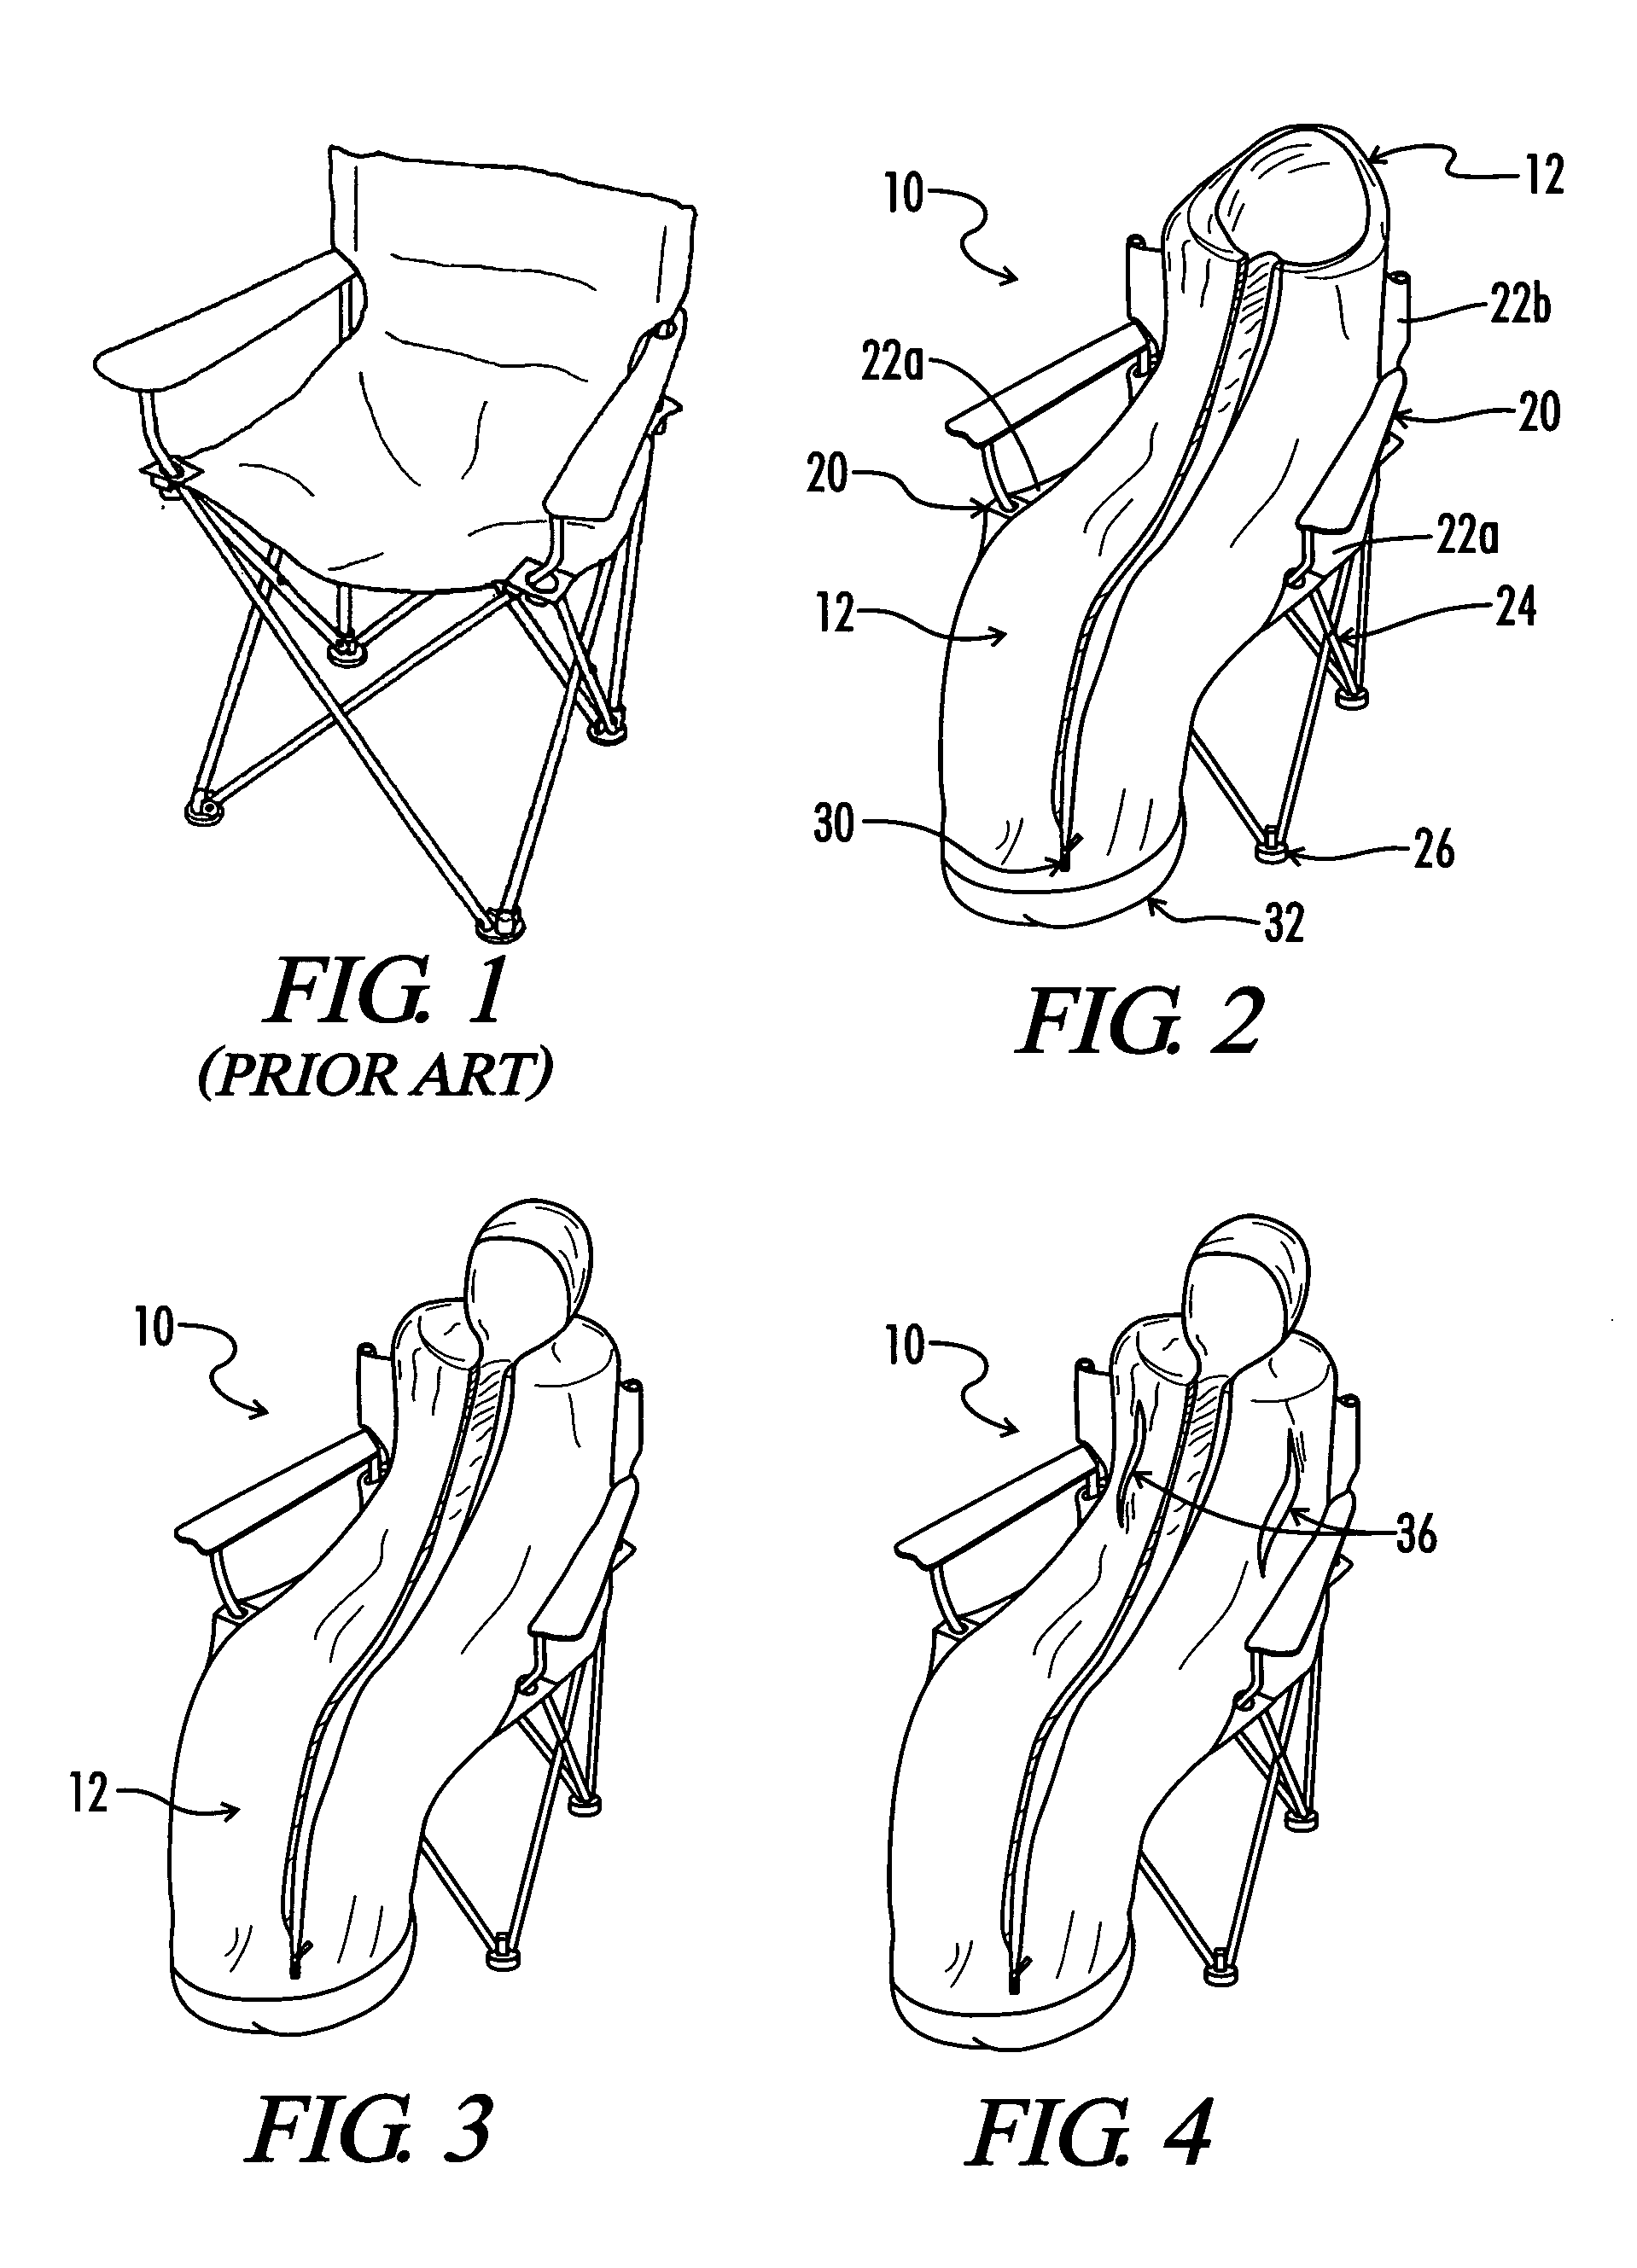 Collapsible inclement weather chair